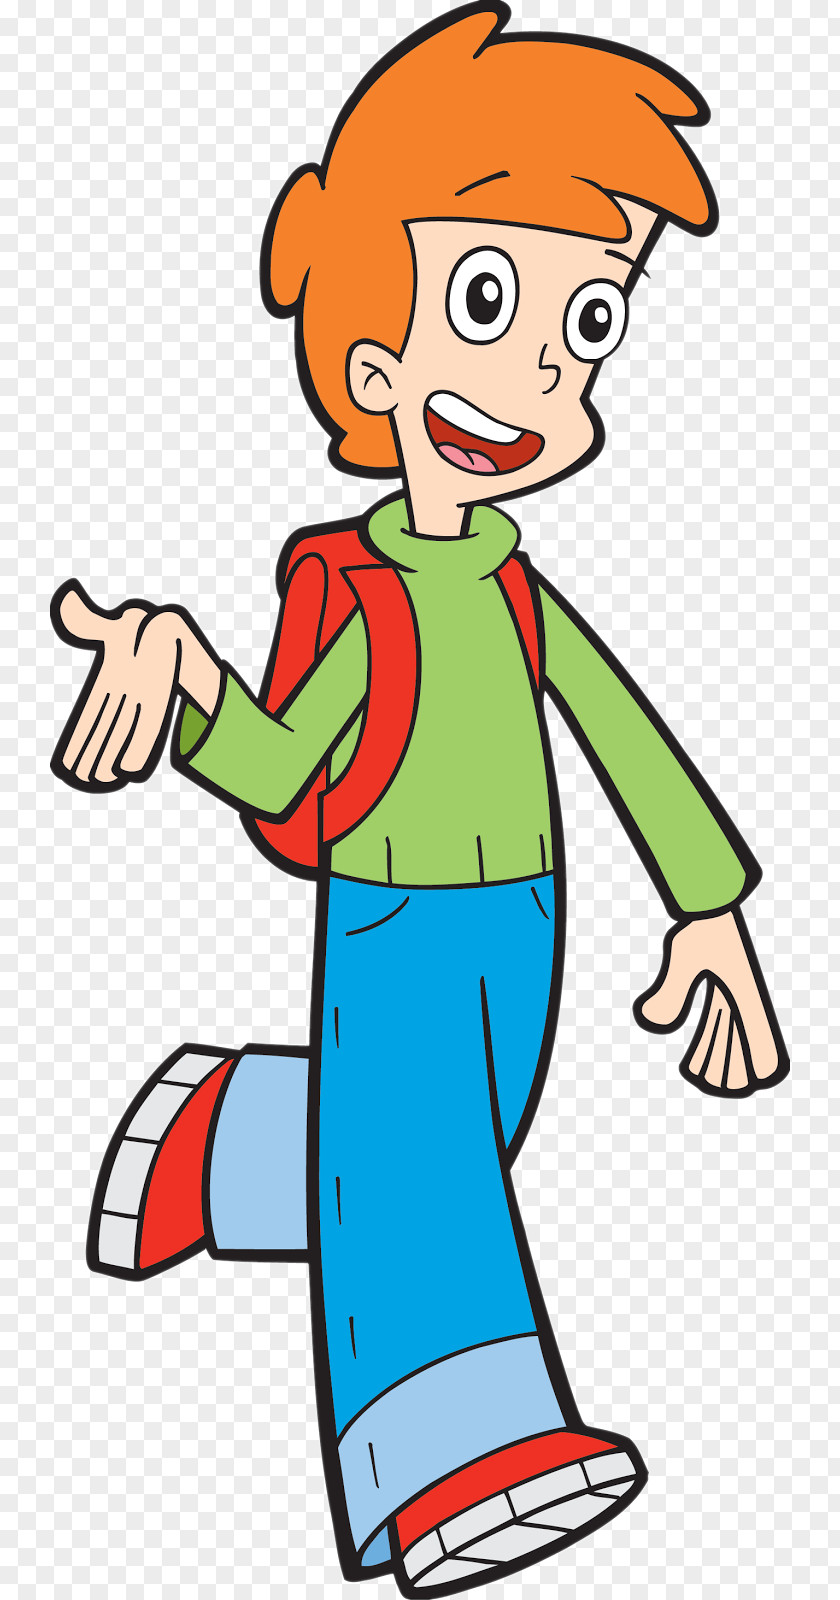 Cartoon Character Animated PBS Kids Television Show PNG